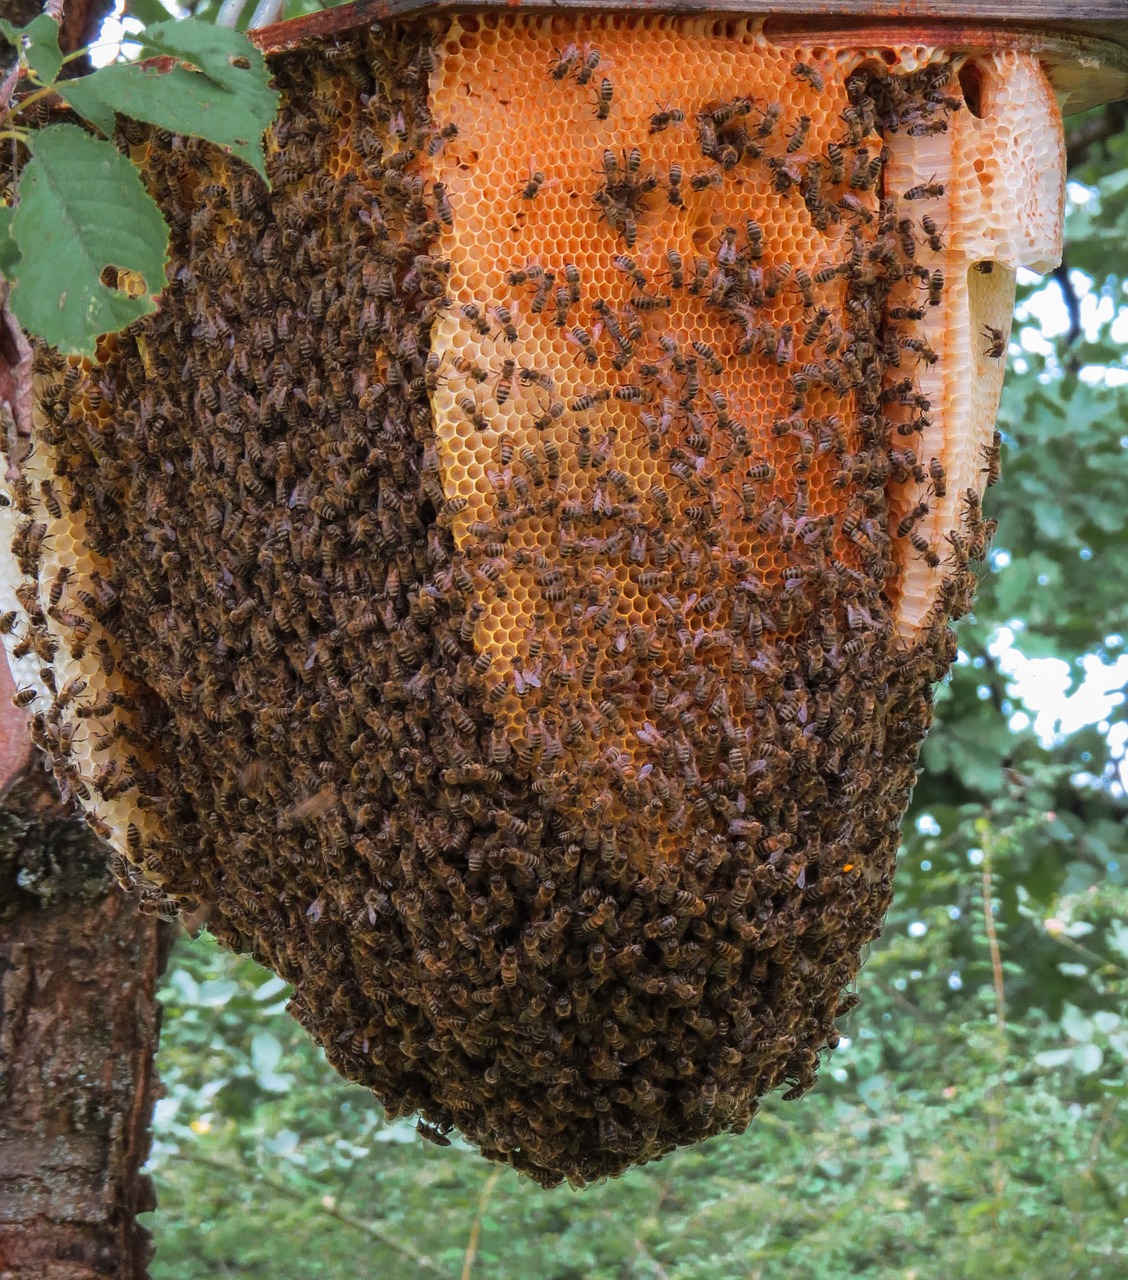 Bumblebee nests usually only last a season and most solitary species are unlikely to cause a problem. Most bees rarely sting unless provoked. .